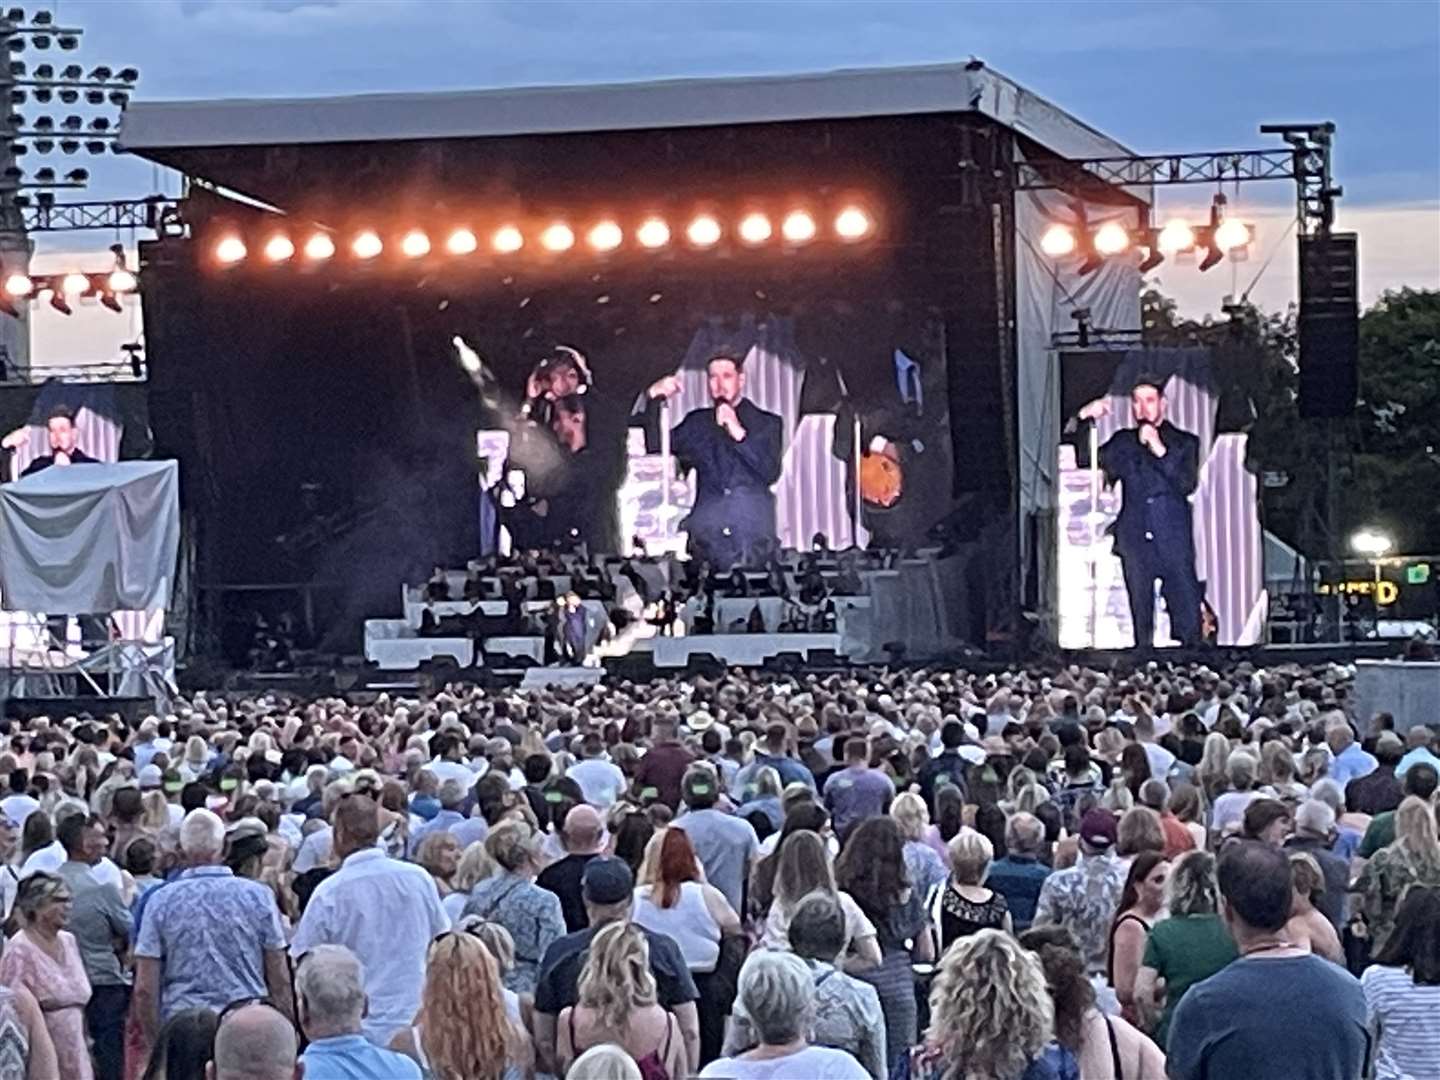 Michael Bublé performing in Canterbury